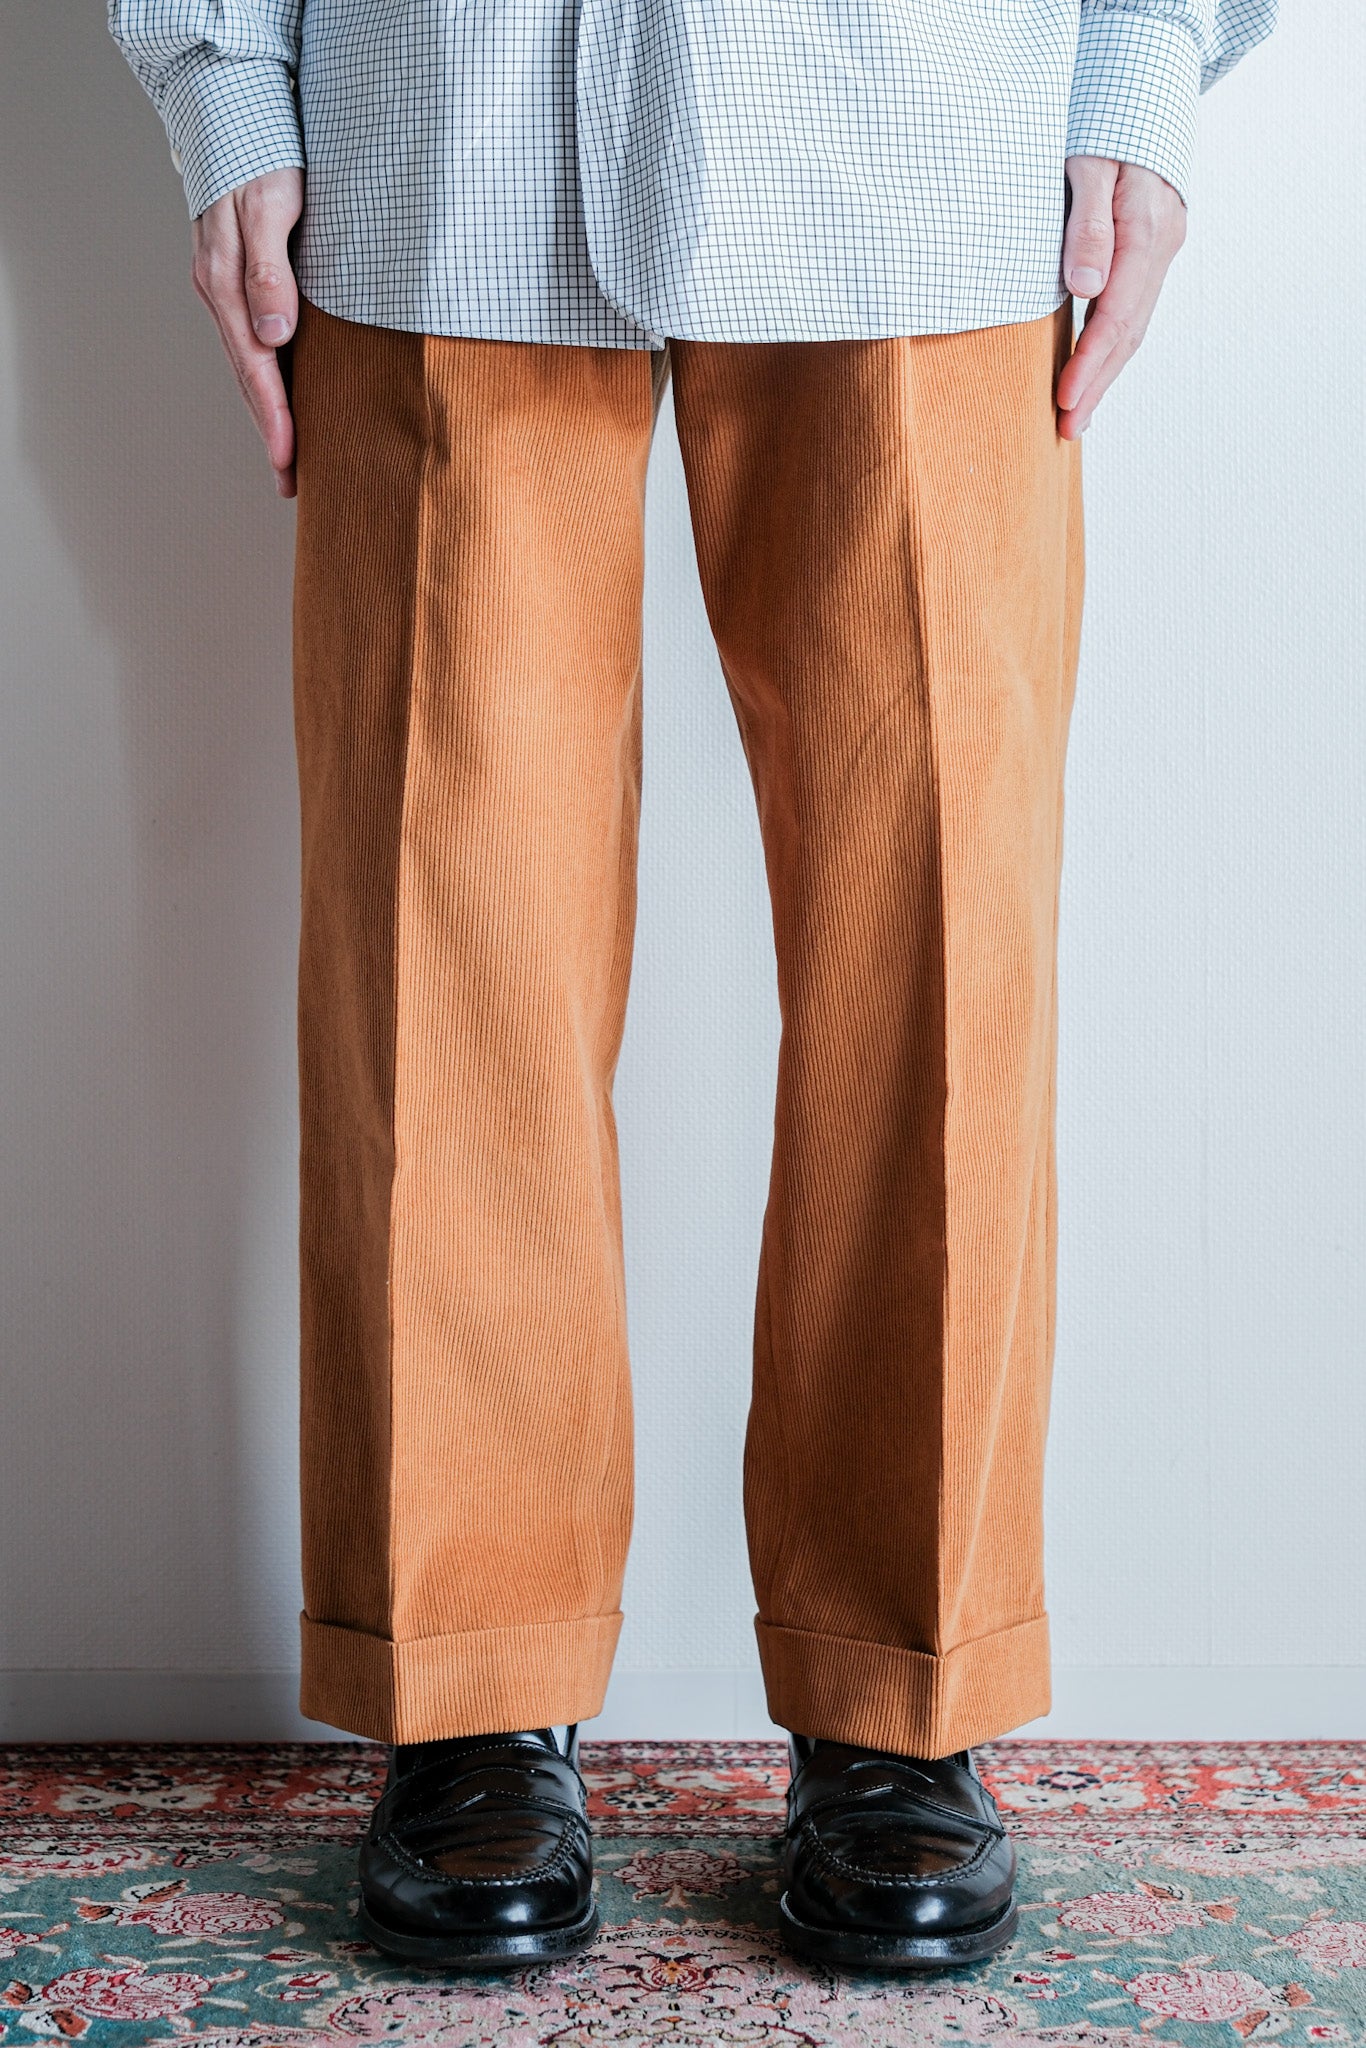 【~00's】Old ARNYS PARIS In Tuck Turn Up Corduroy Trousers Size.46